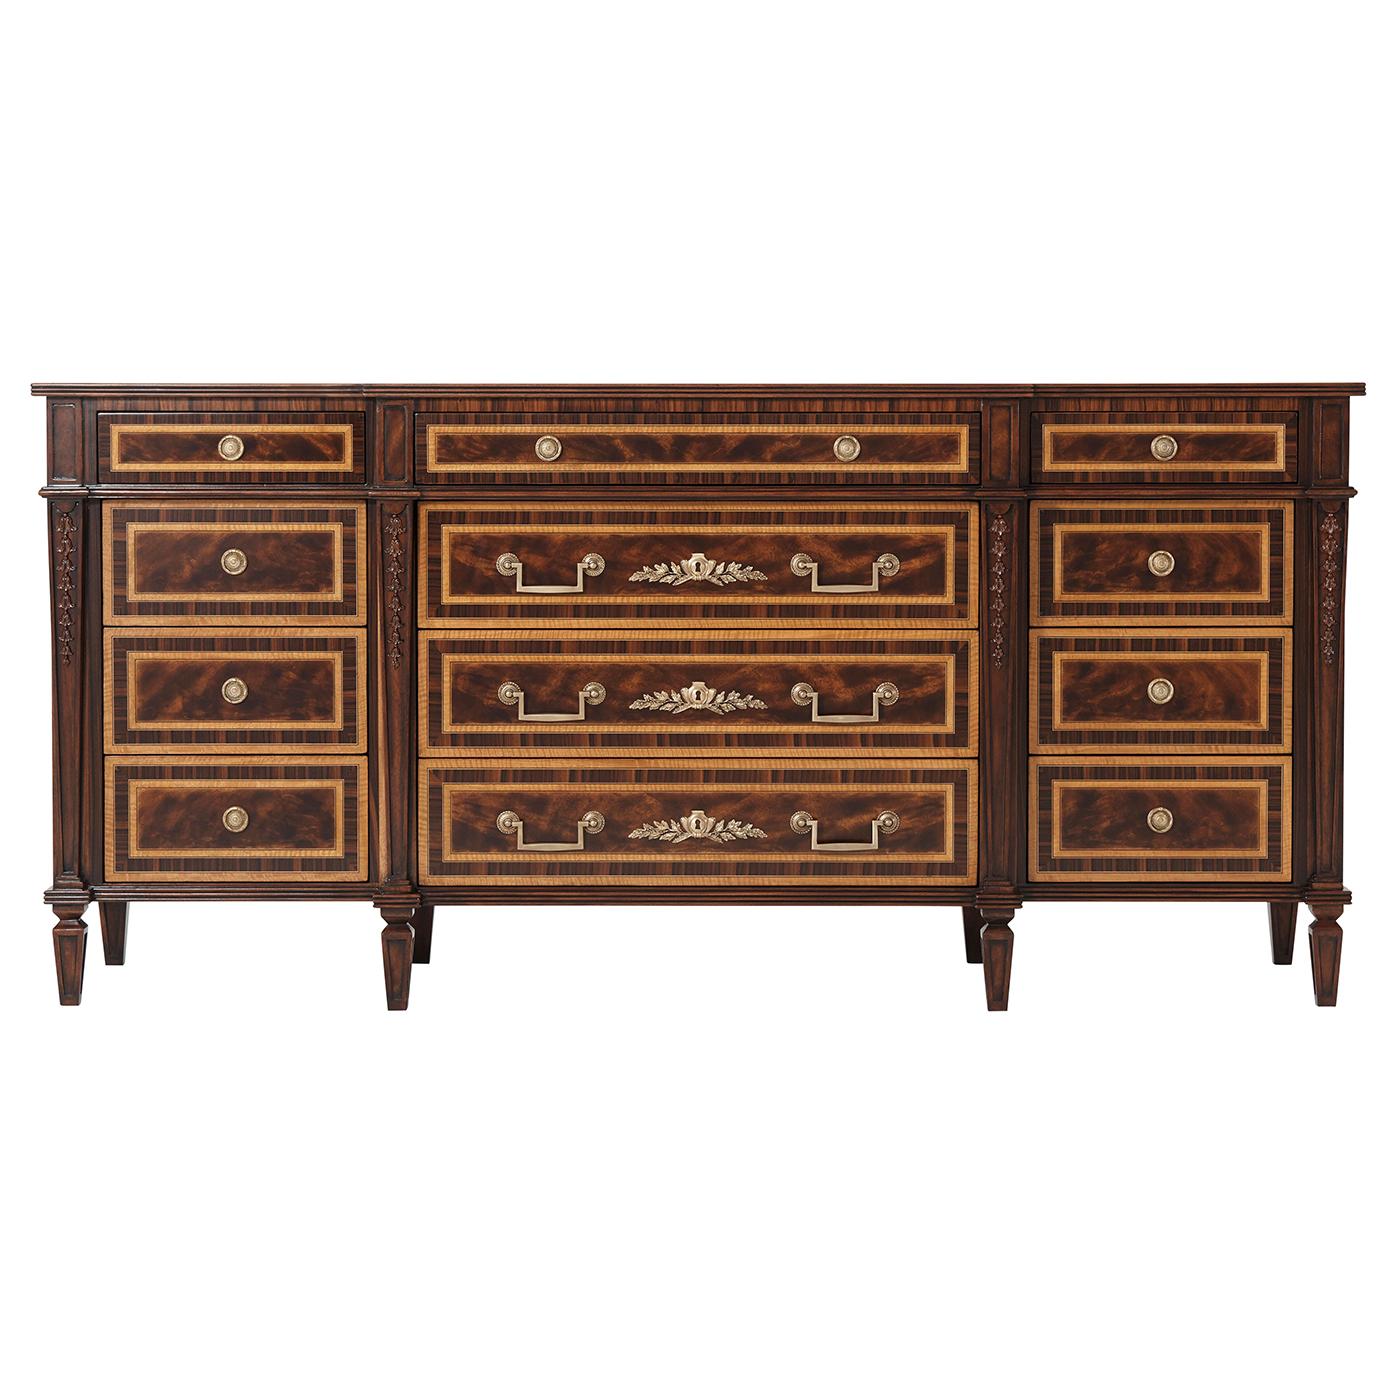 A flame mahogany, movingue and rosewood banded dresser, the breakfront rectangular top with a reeded edge, with three frieze drawers and six short and three long further drawers below, all with fine brass handles and on paneled tapering